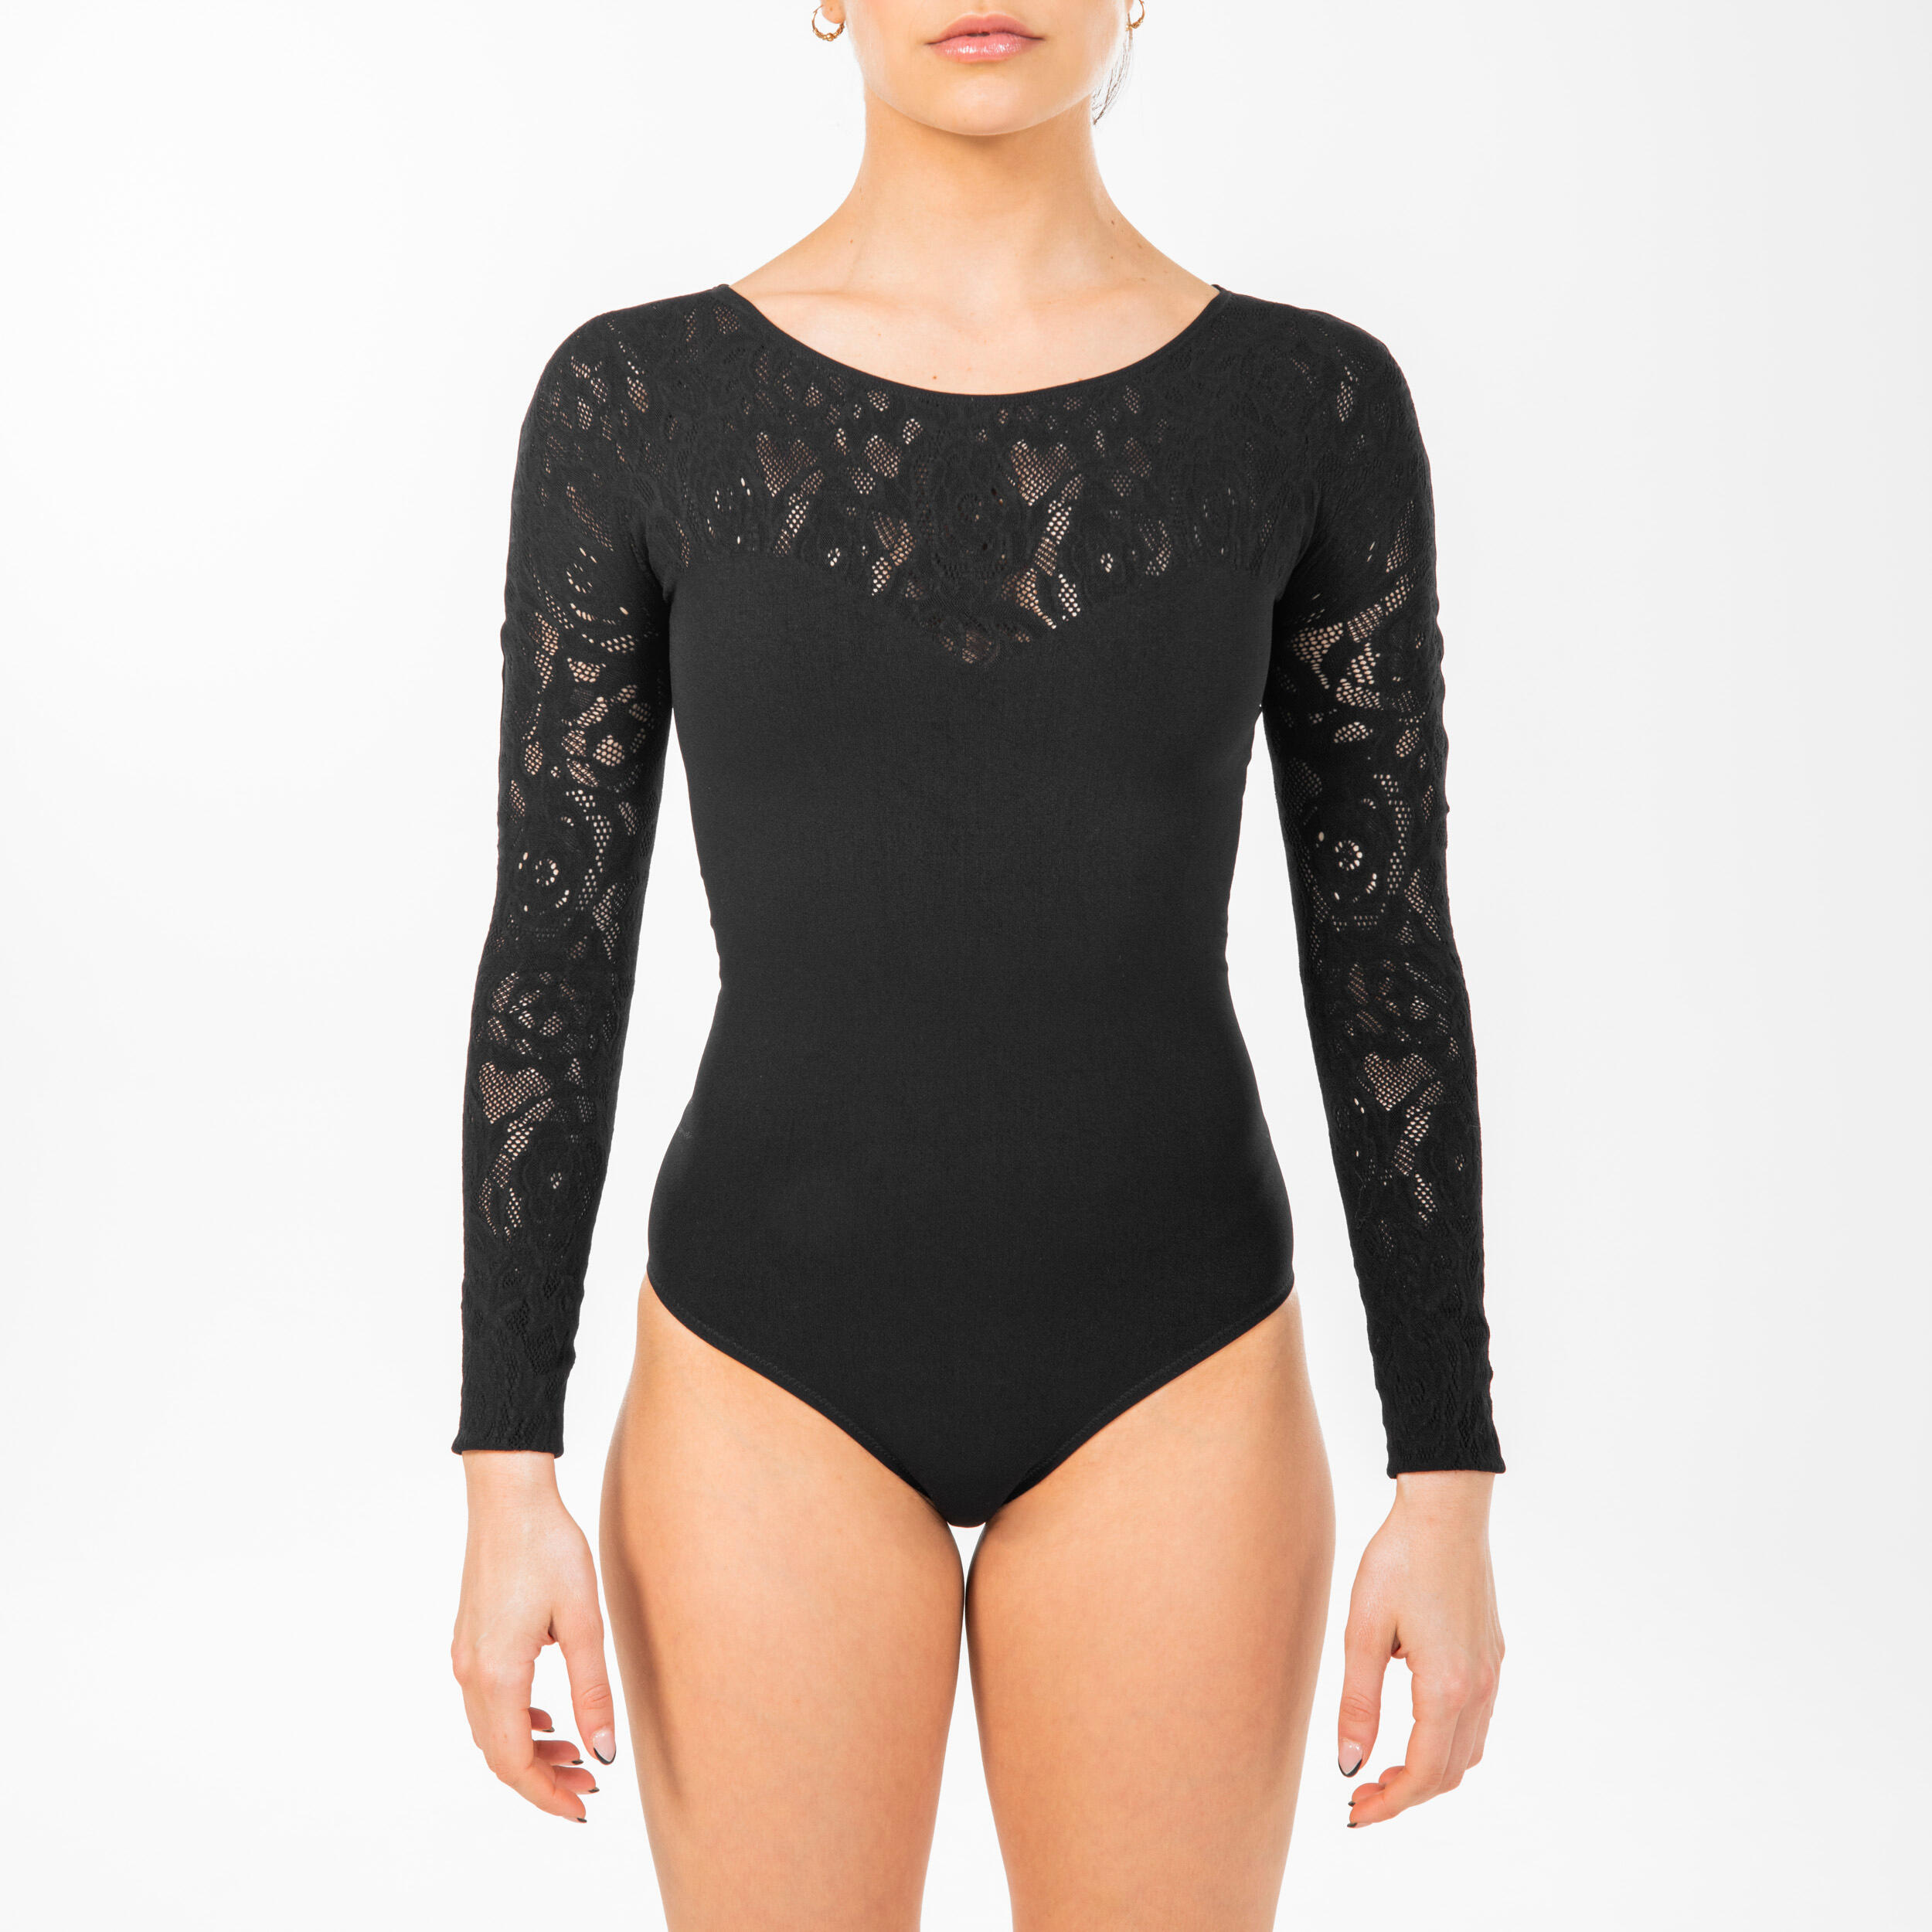 Women's Long-Sleeved Black Lace Dance Leotard - Made in Italy 4/6